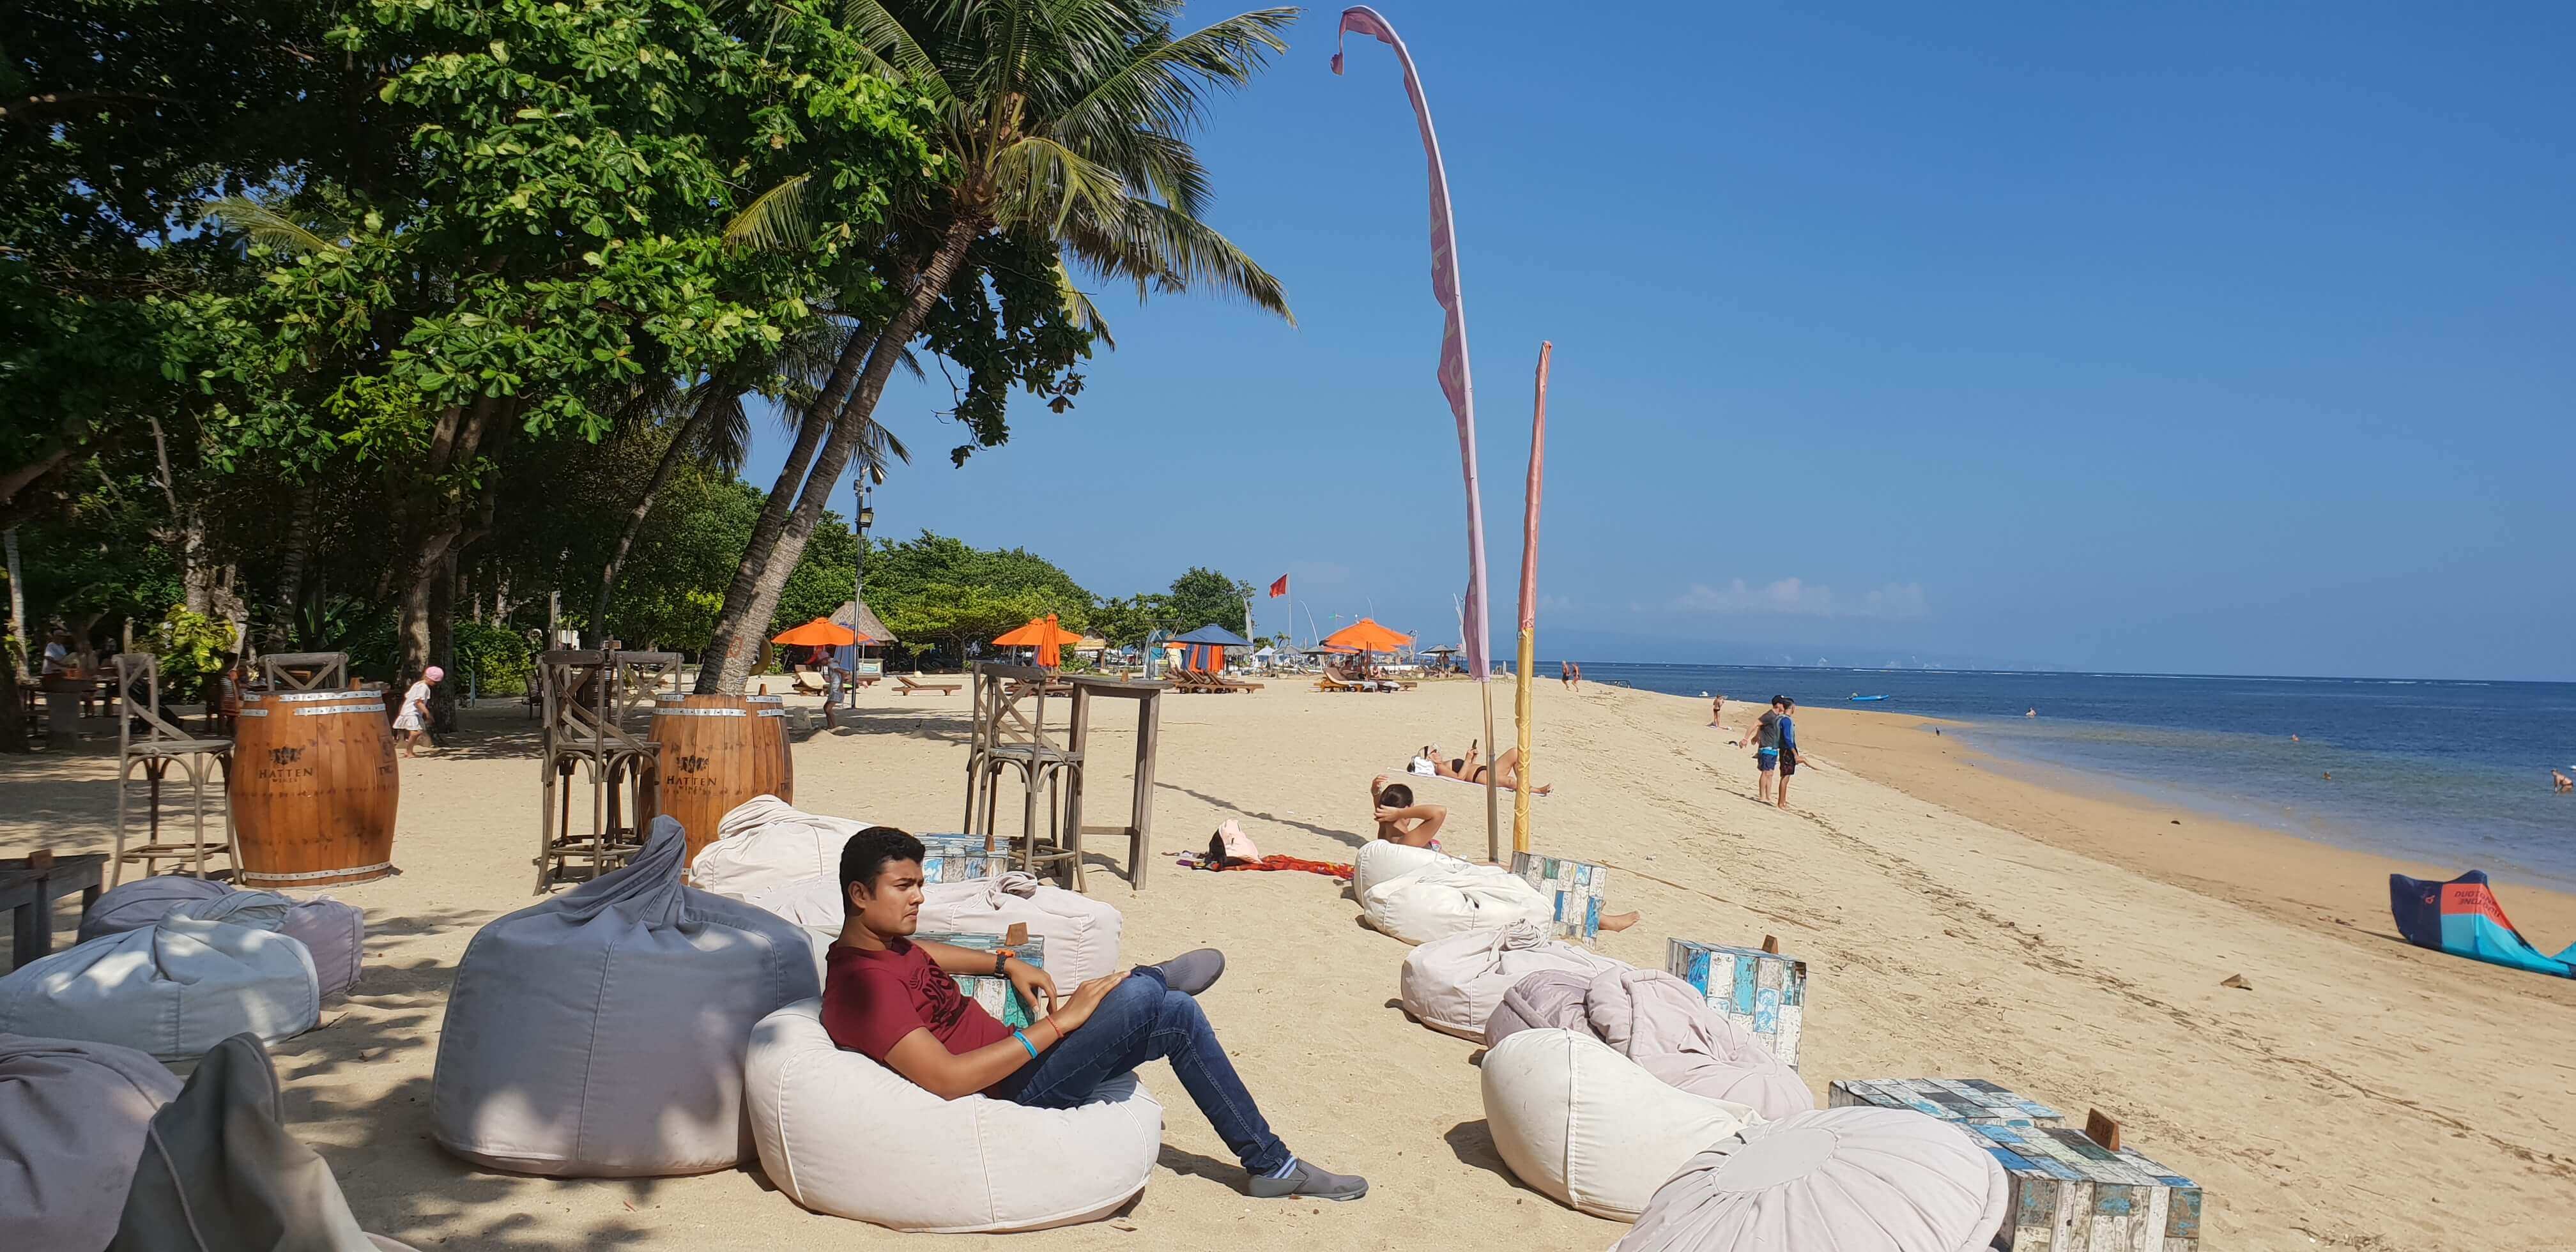 Sitting by the beach side at the Genius Cafe is one of the most relaxing things to do in Sanur